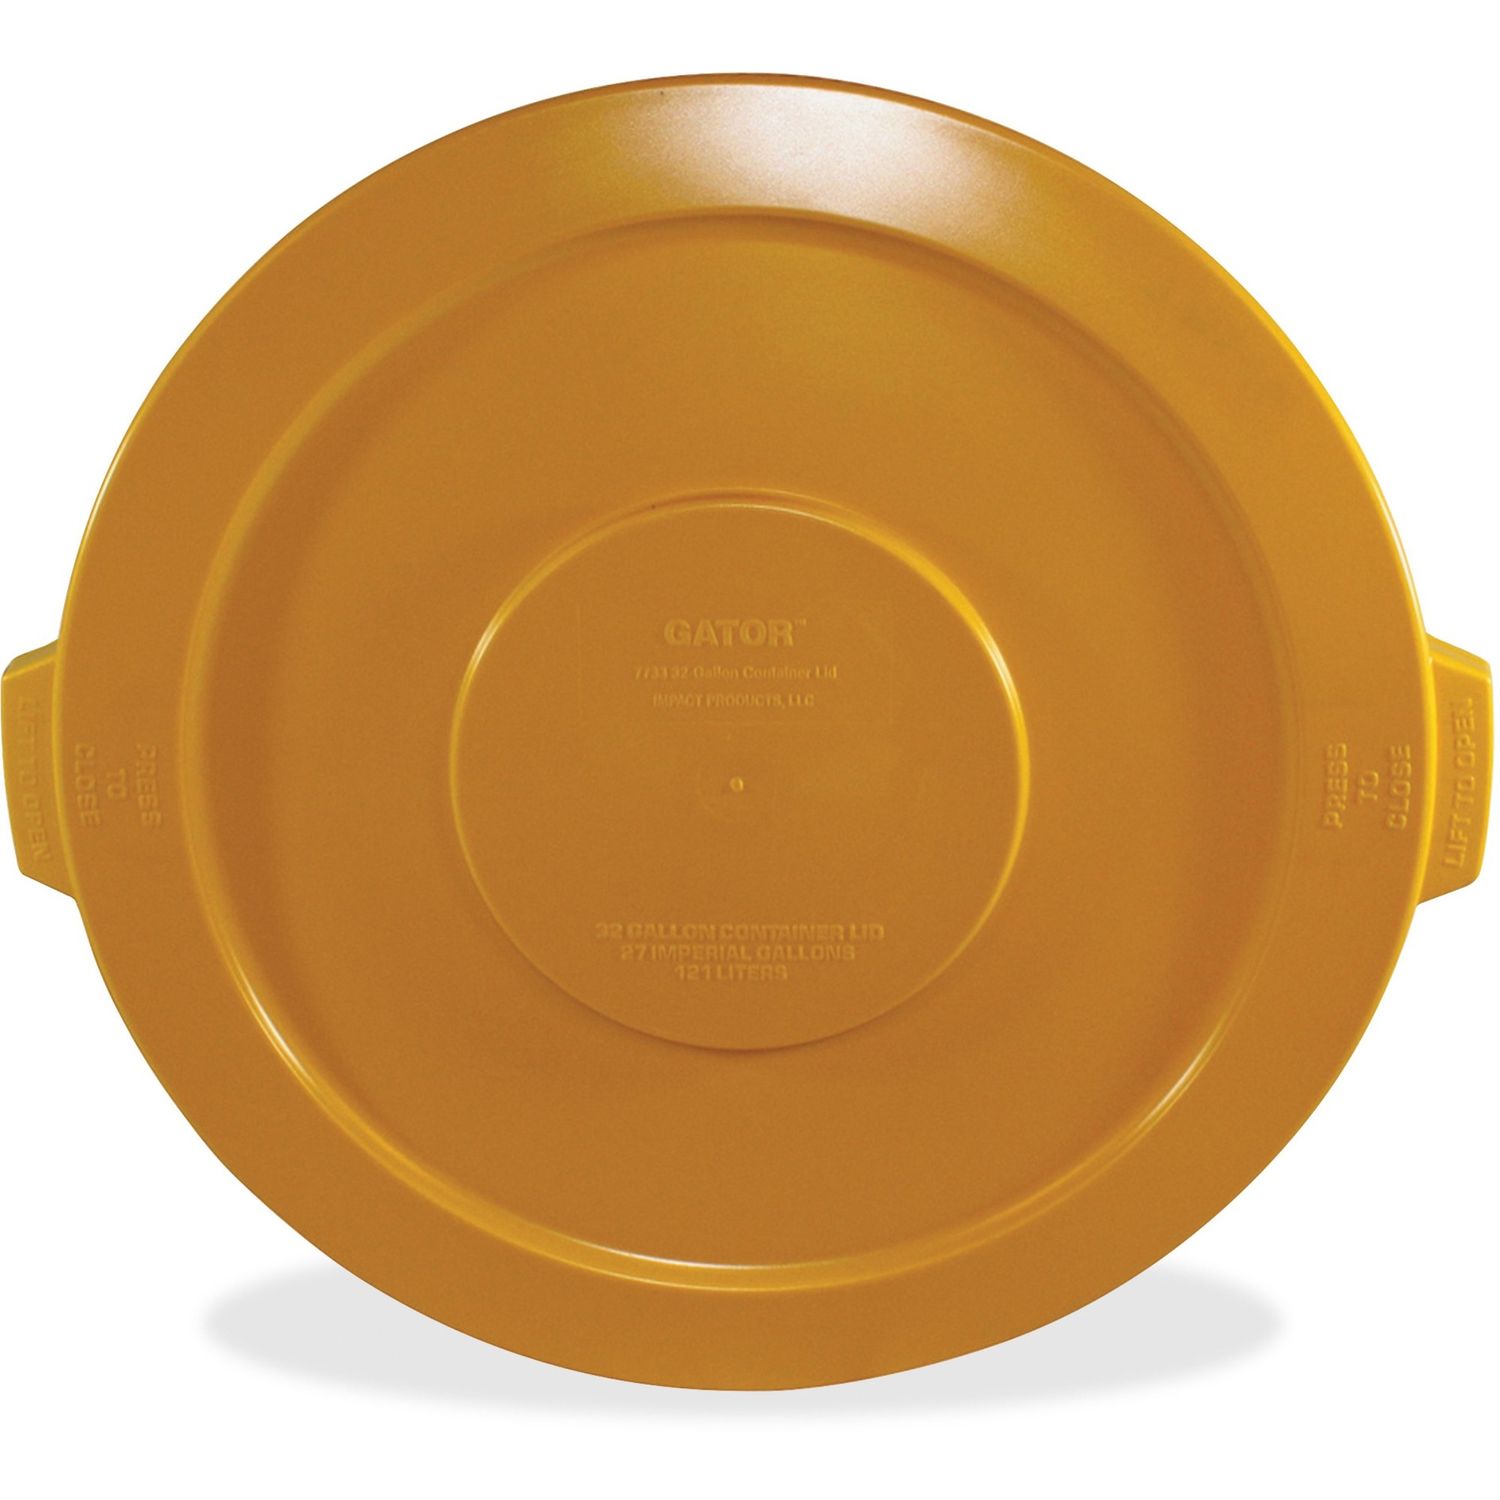 32-gallon Container Lid Round, Polyethylene, Resin, Plastic, 1 Each, Yellow